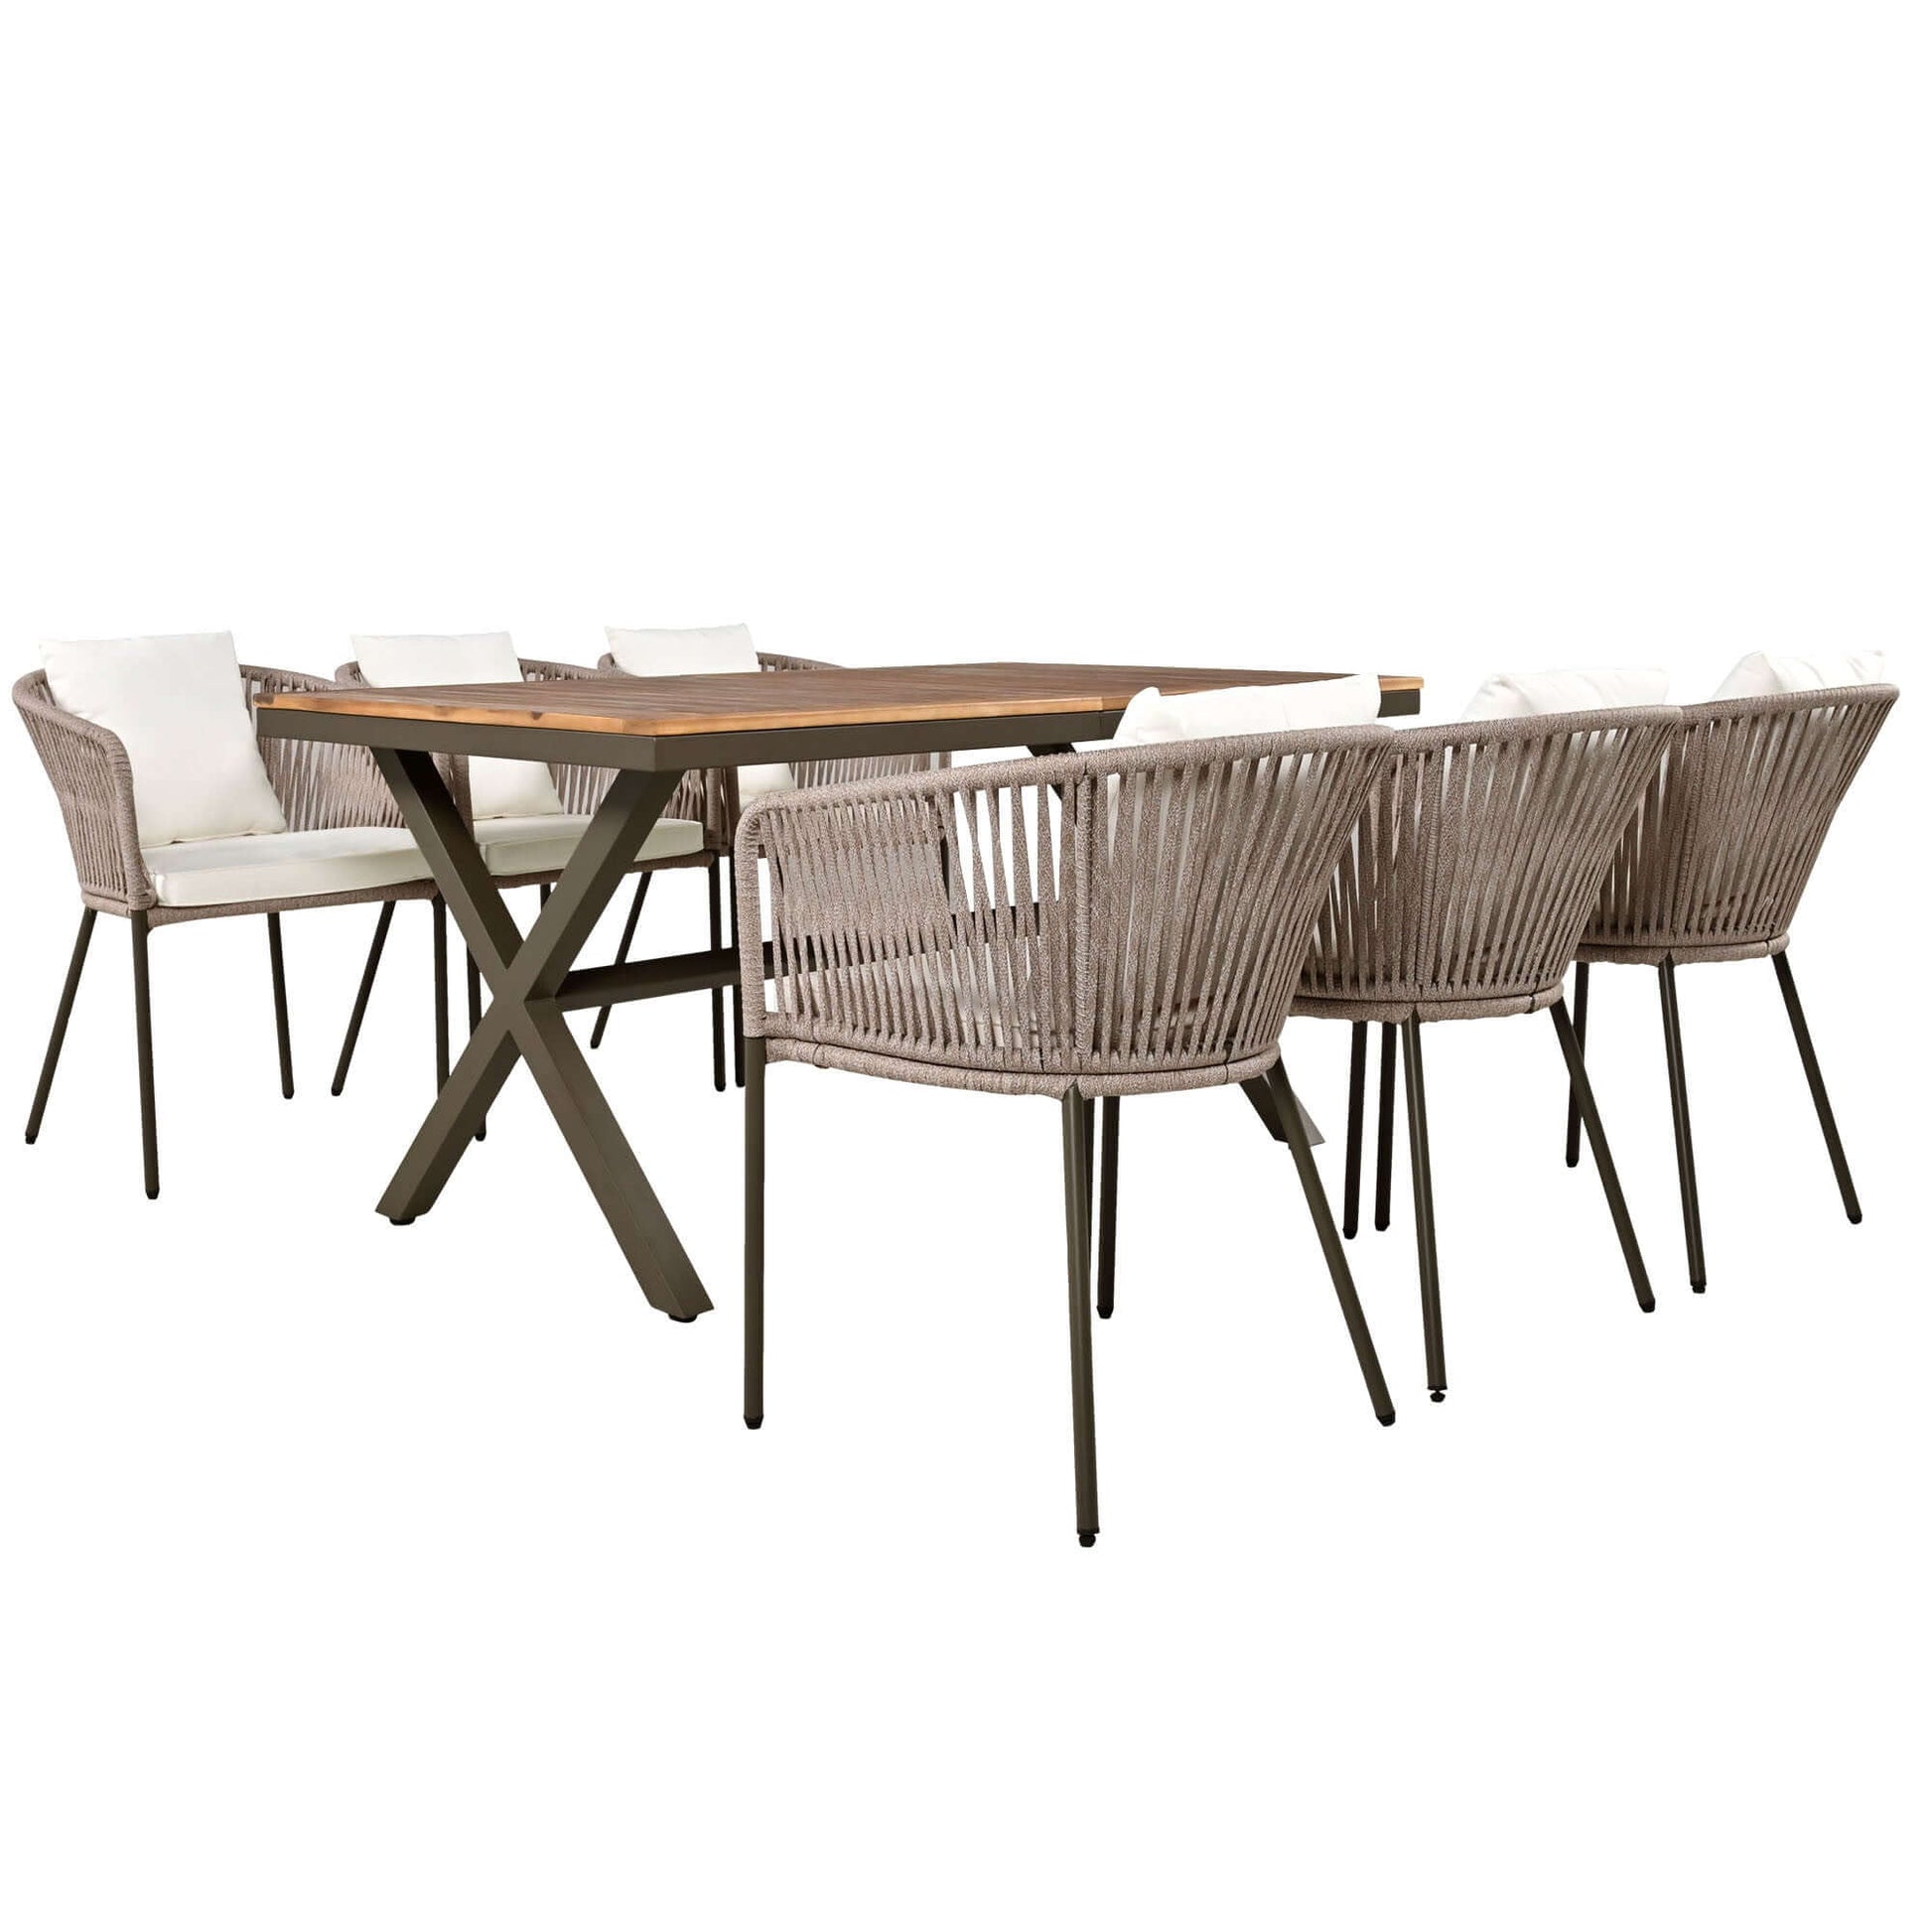 GO 7 Pieces Patio Dining Set with Acacia Wood Tabletop and Beige Cushions, Metal Frame for Garden, Backyard, and Balcony.